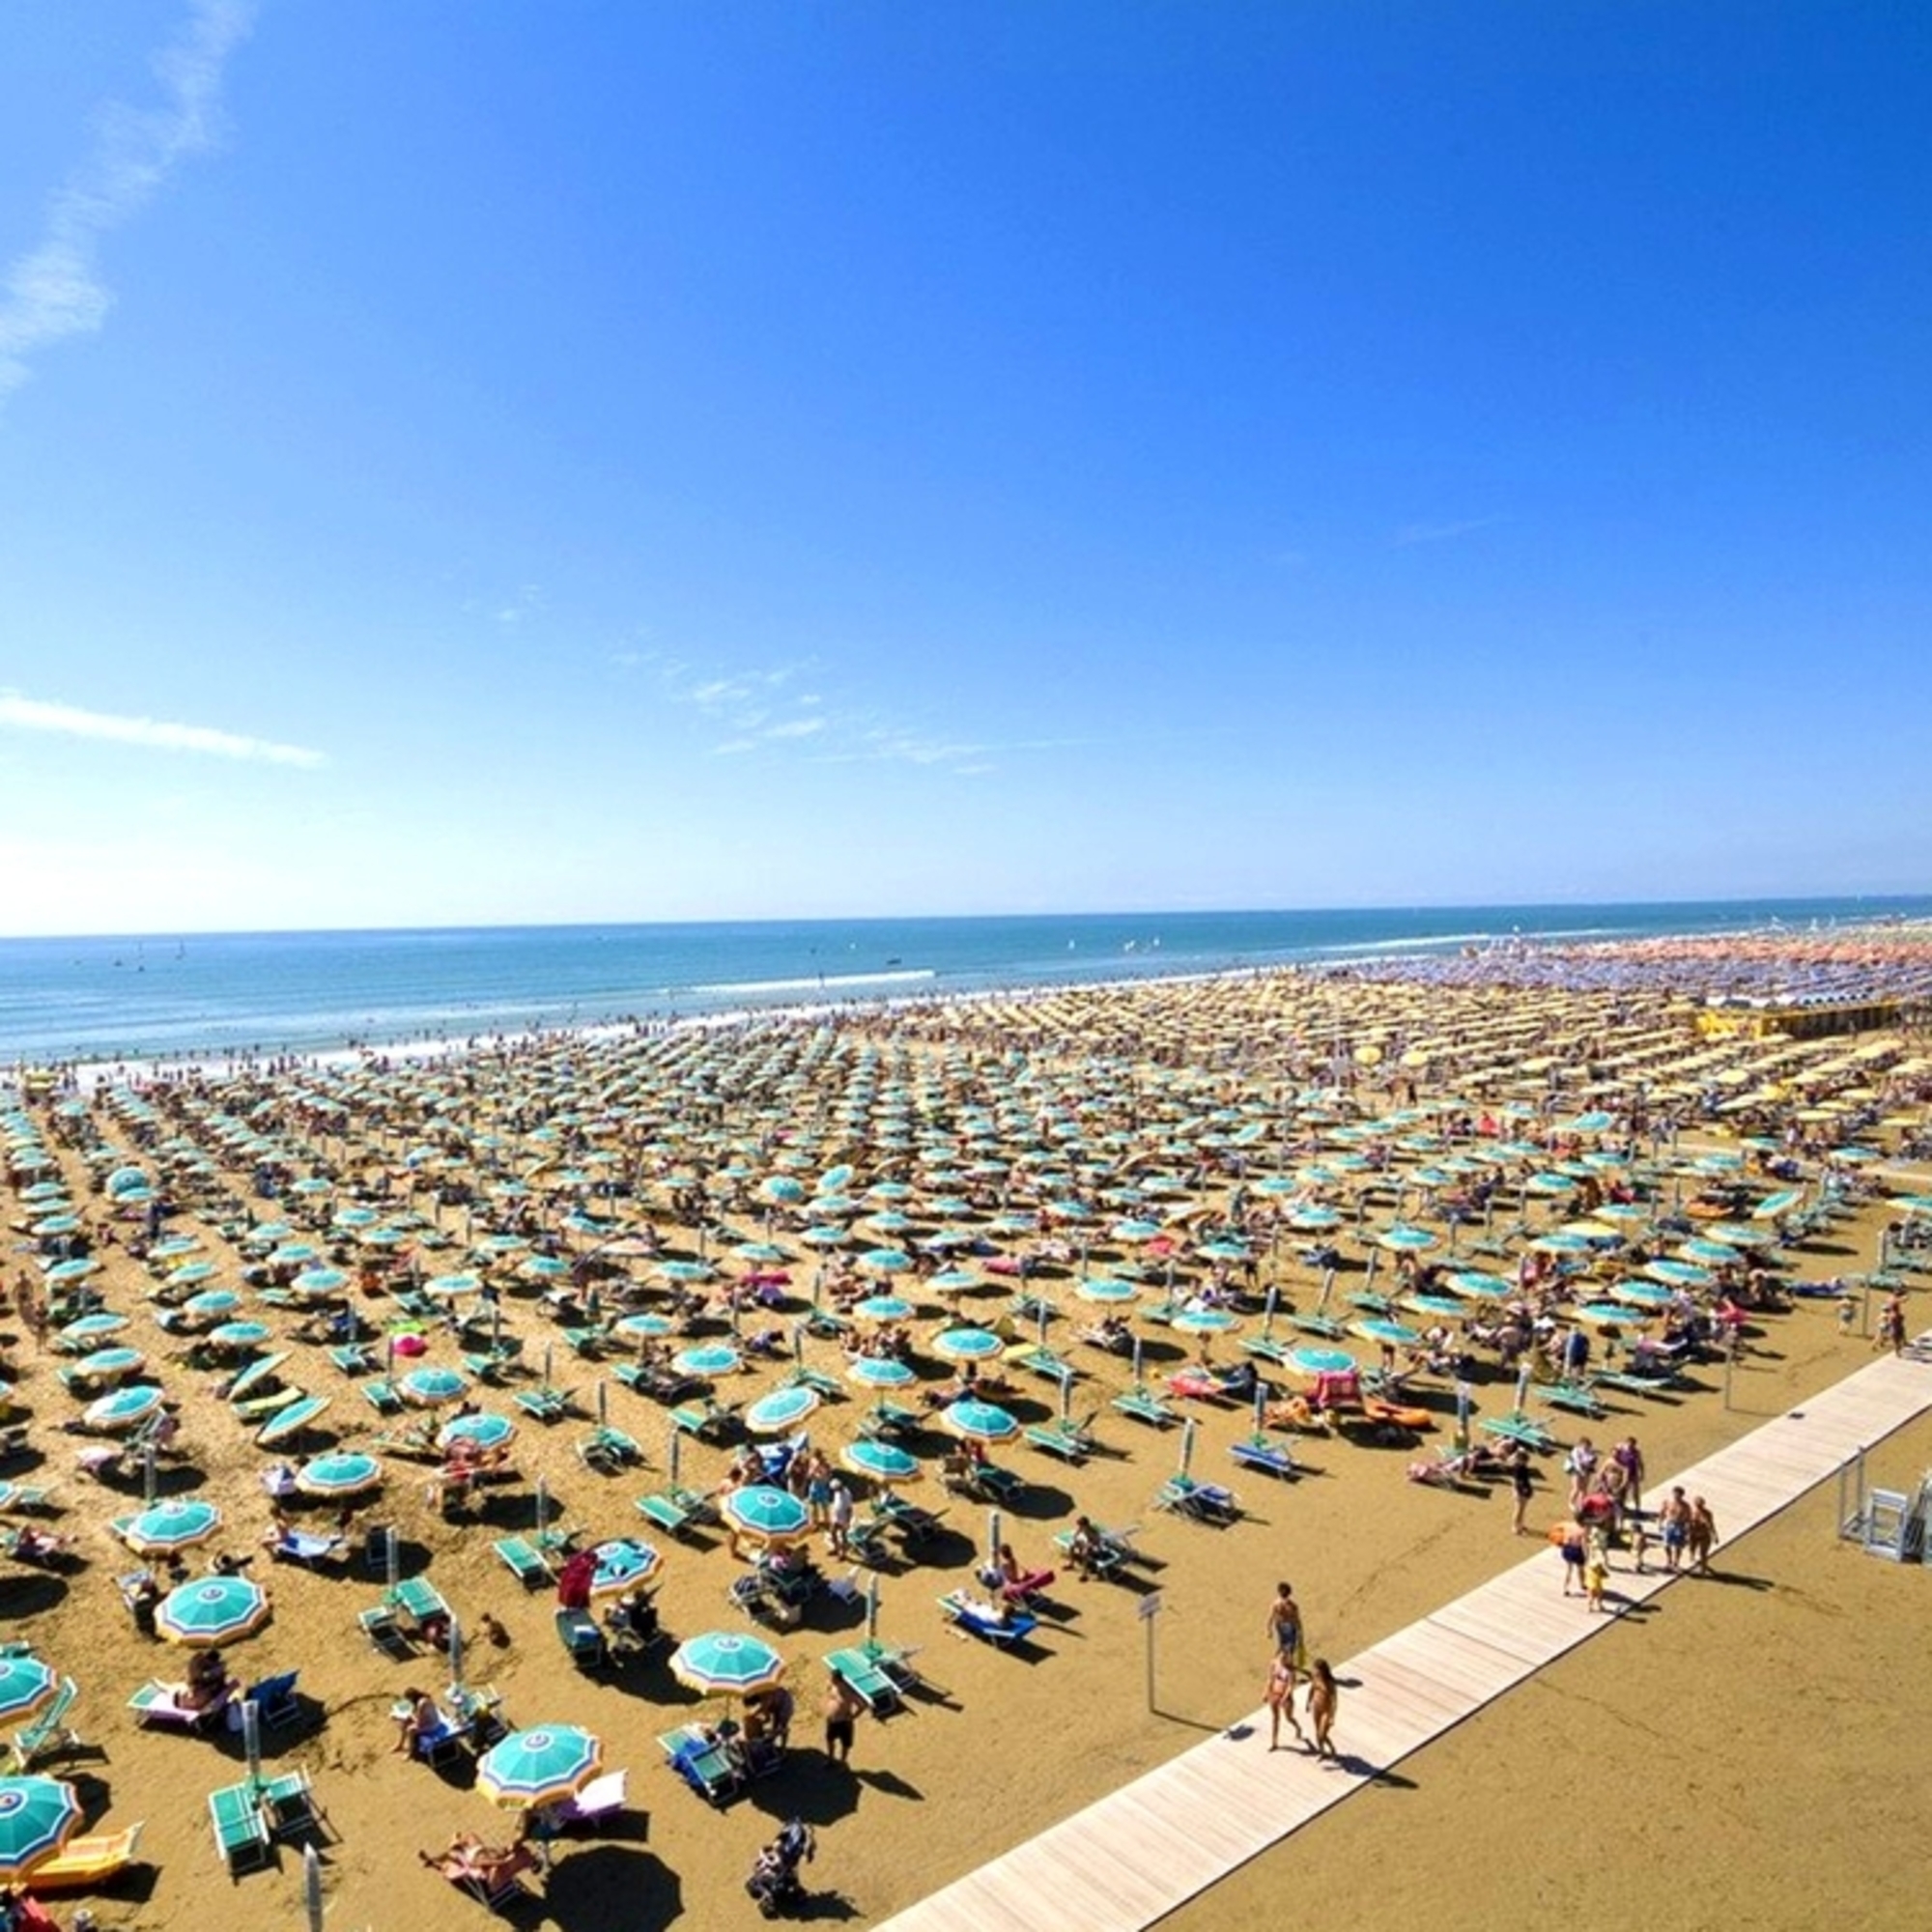 summer-holidays-on-the-beach-of-bibione-in-italy-europa-tourist-group